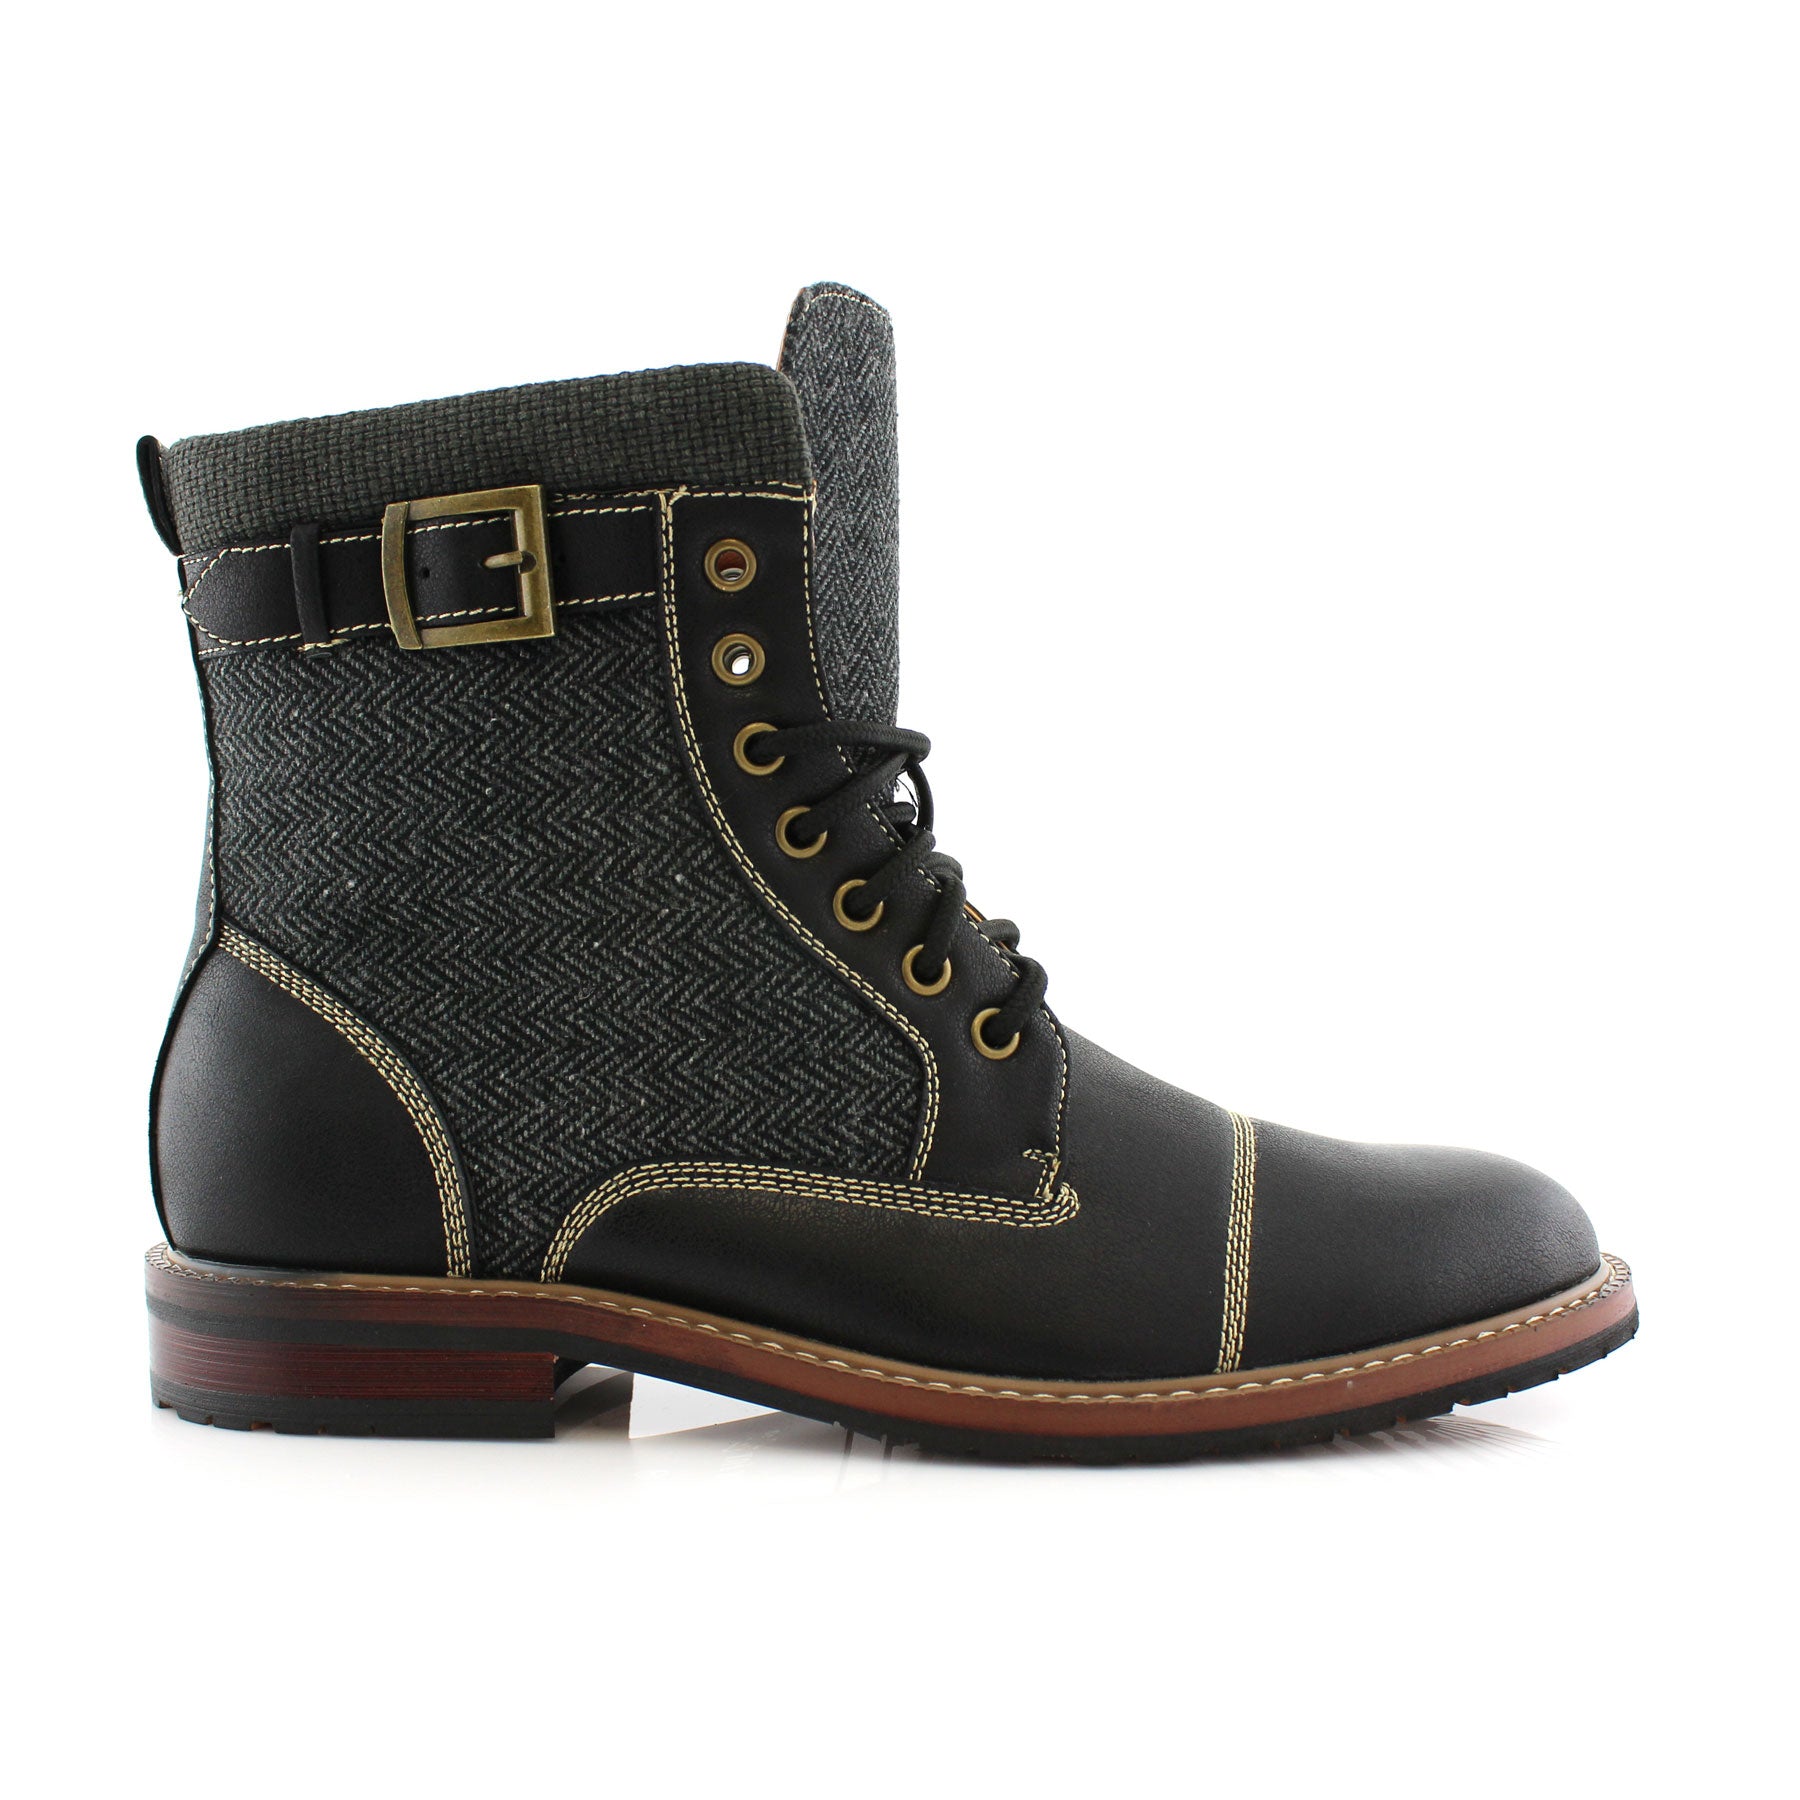 Rugged Duo-Textured Boots | Elijah by Polar Fox | Conal Footwear | Outer Side Angle View